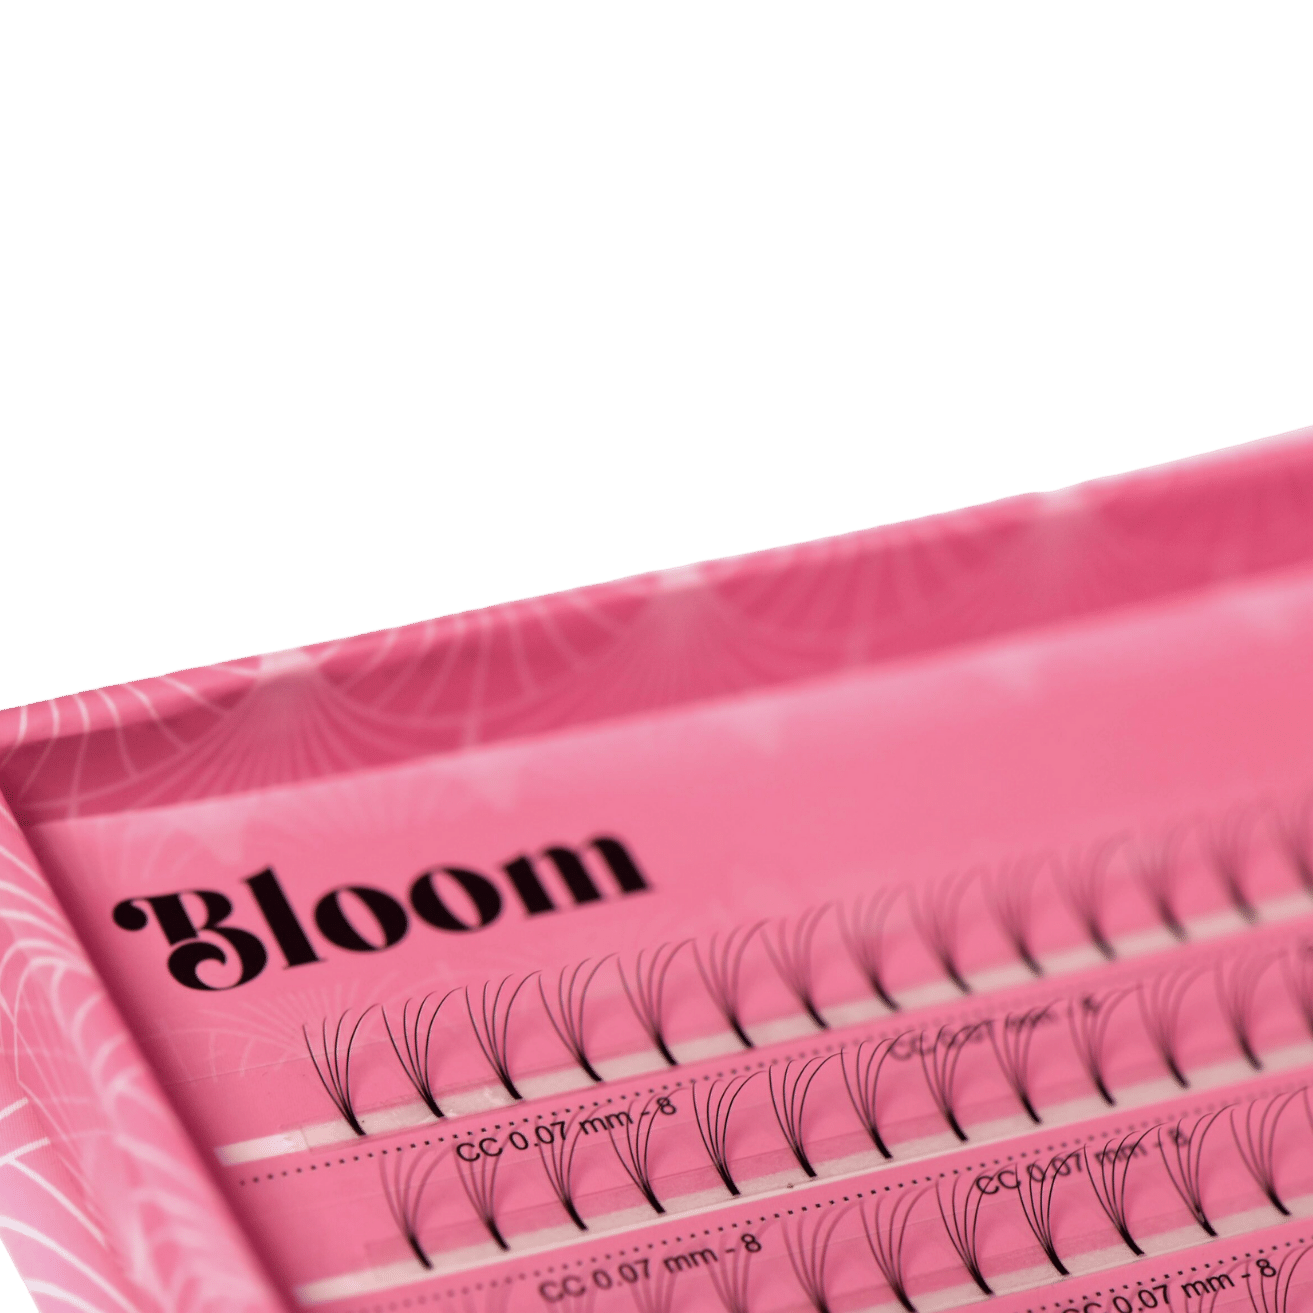 Bloom - Pre-Made Bouquets - Eyelash Extensions